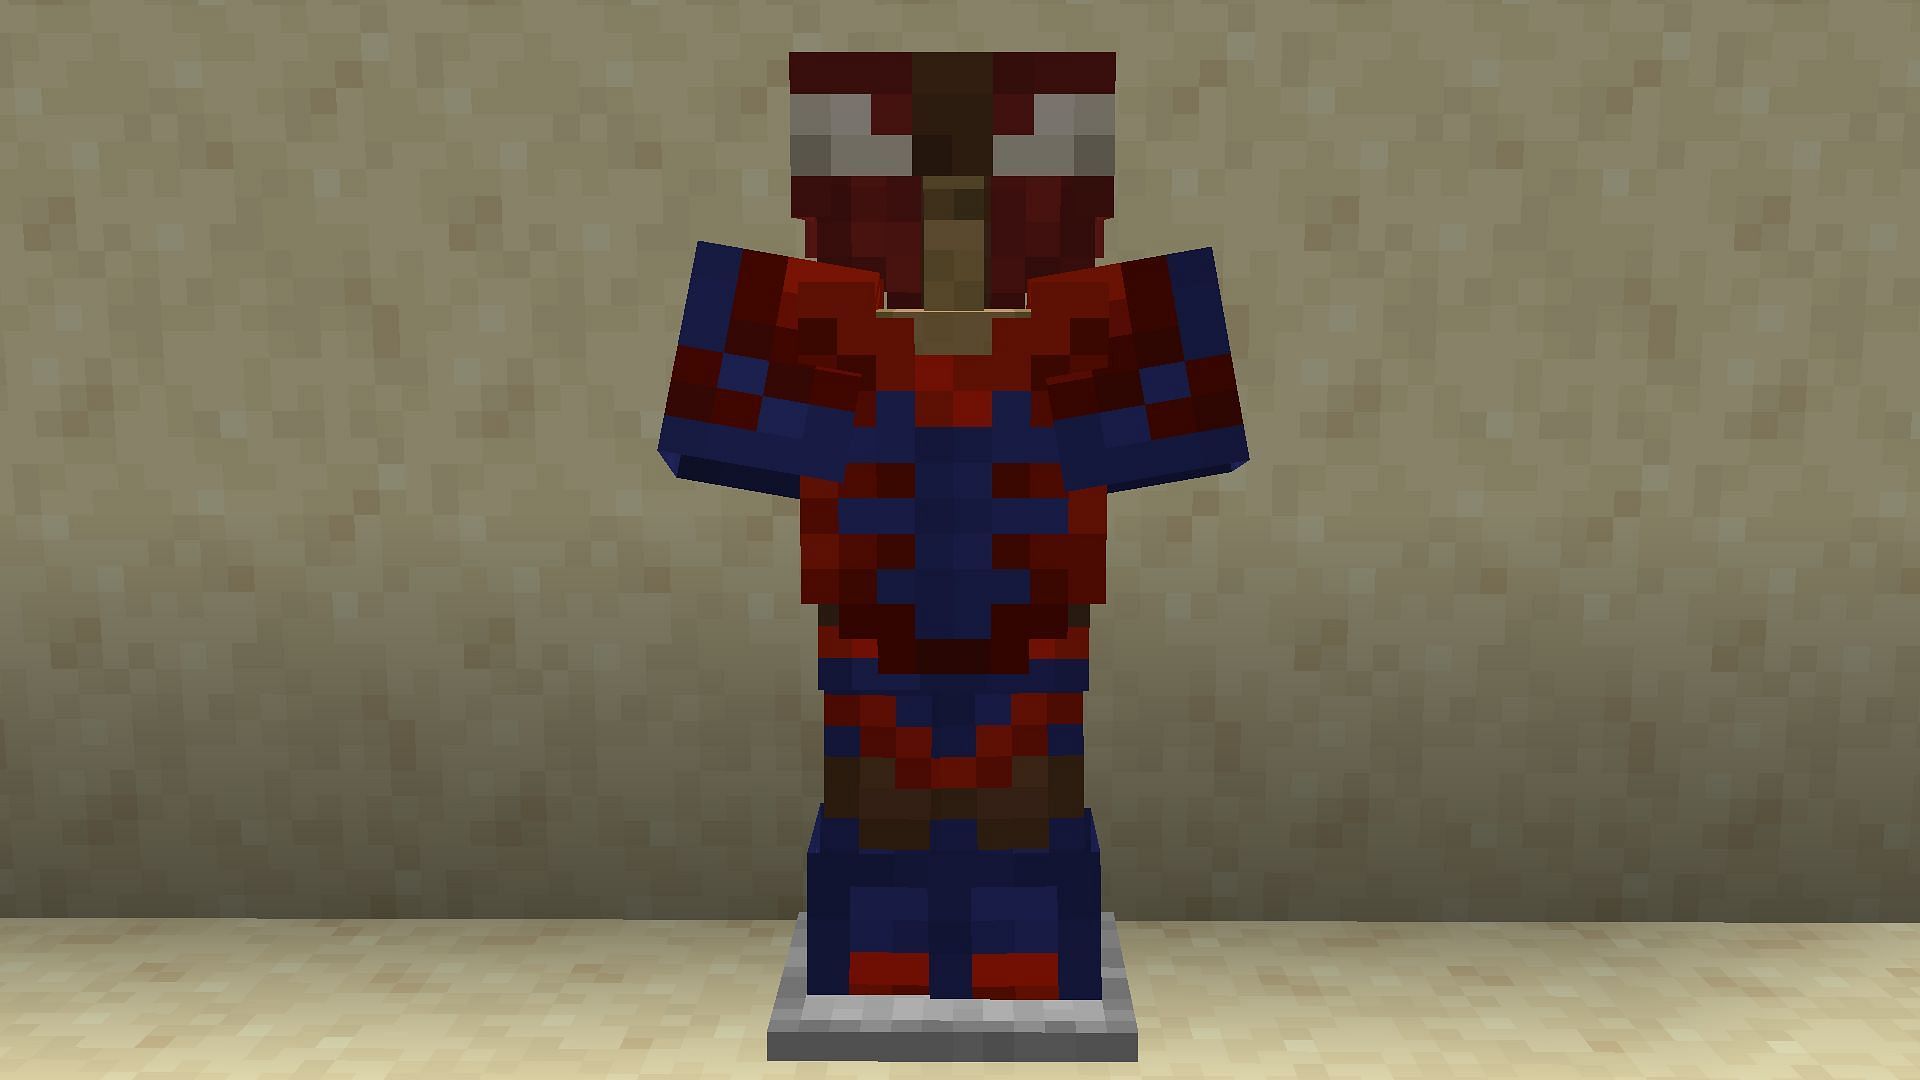 Armor trims allow players to design their armor parts in various ways in Minecraft (Image via Mojang)